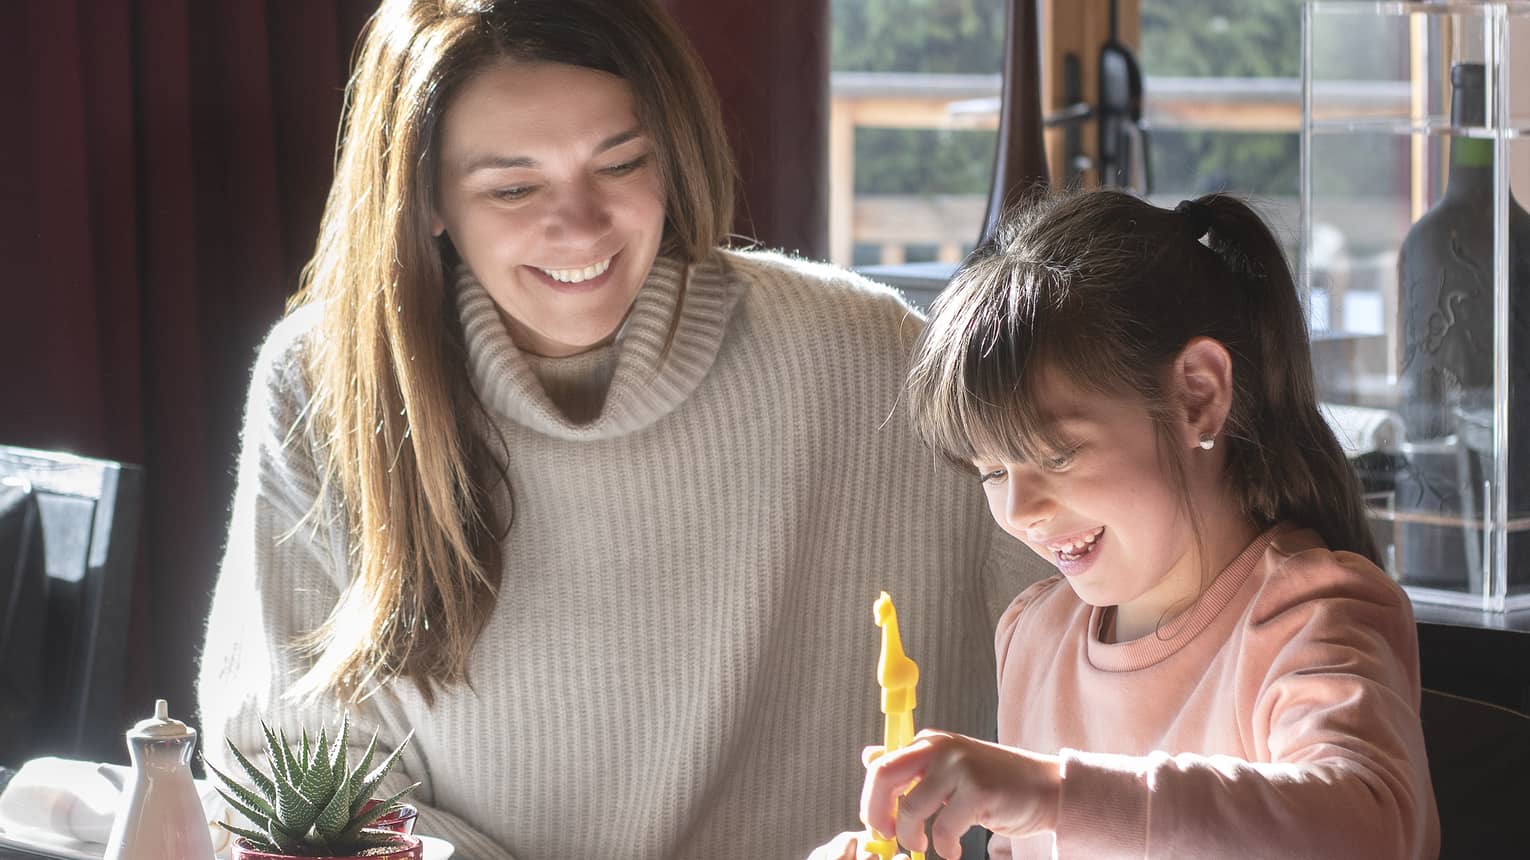 Mom and daughter smiling as daughter picks up sushi from bento box with chopsticks